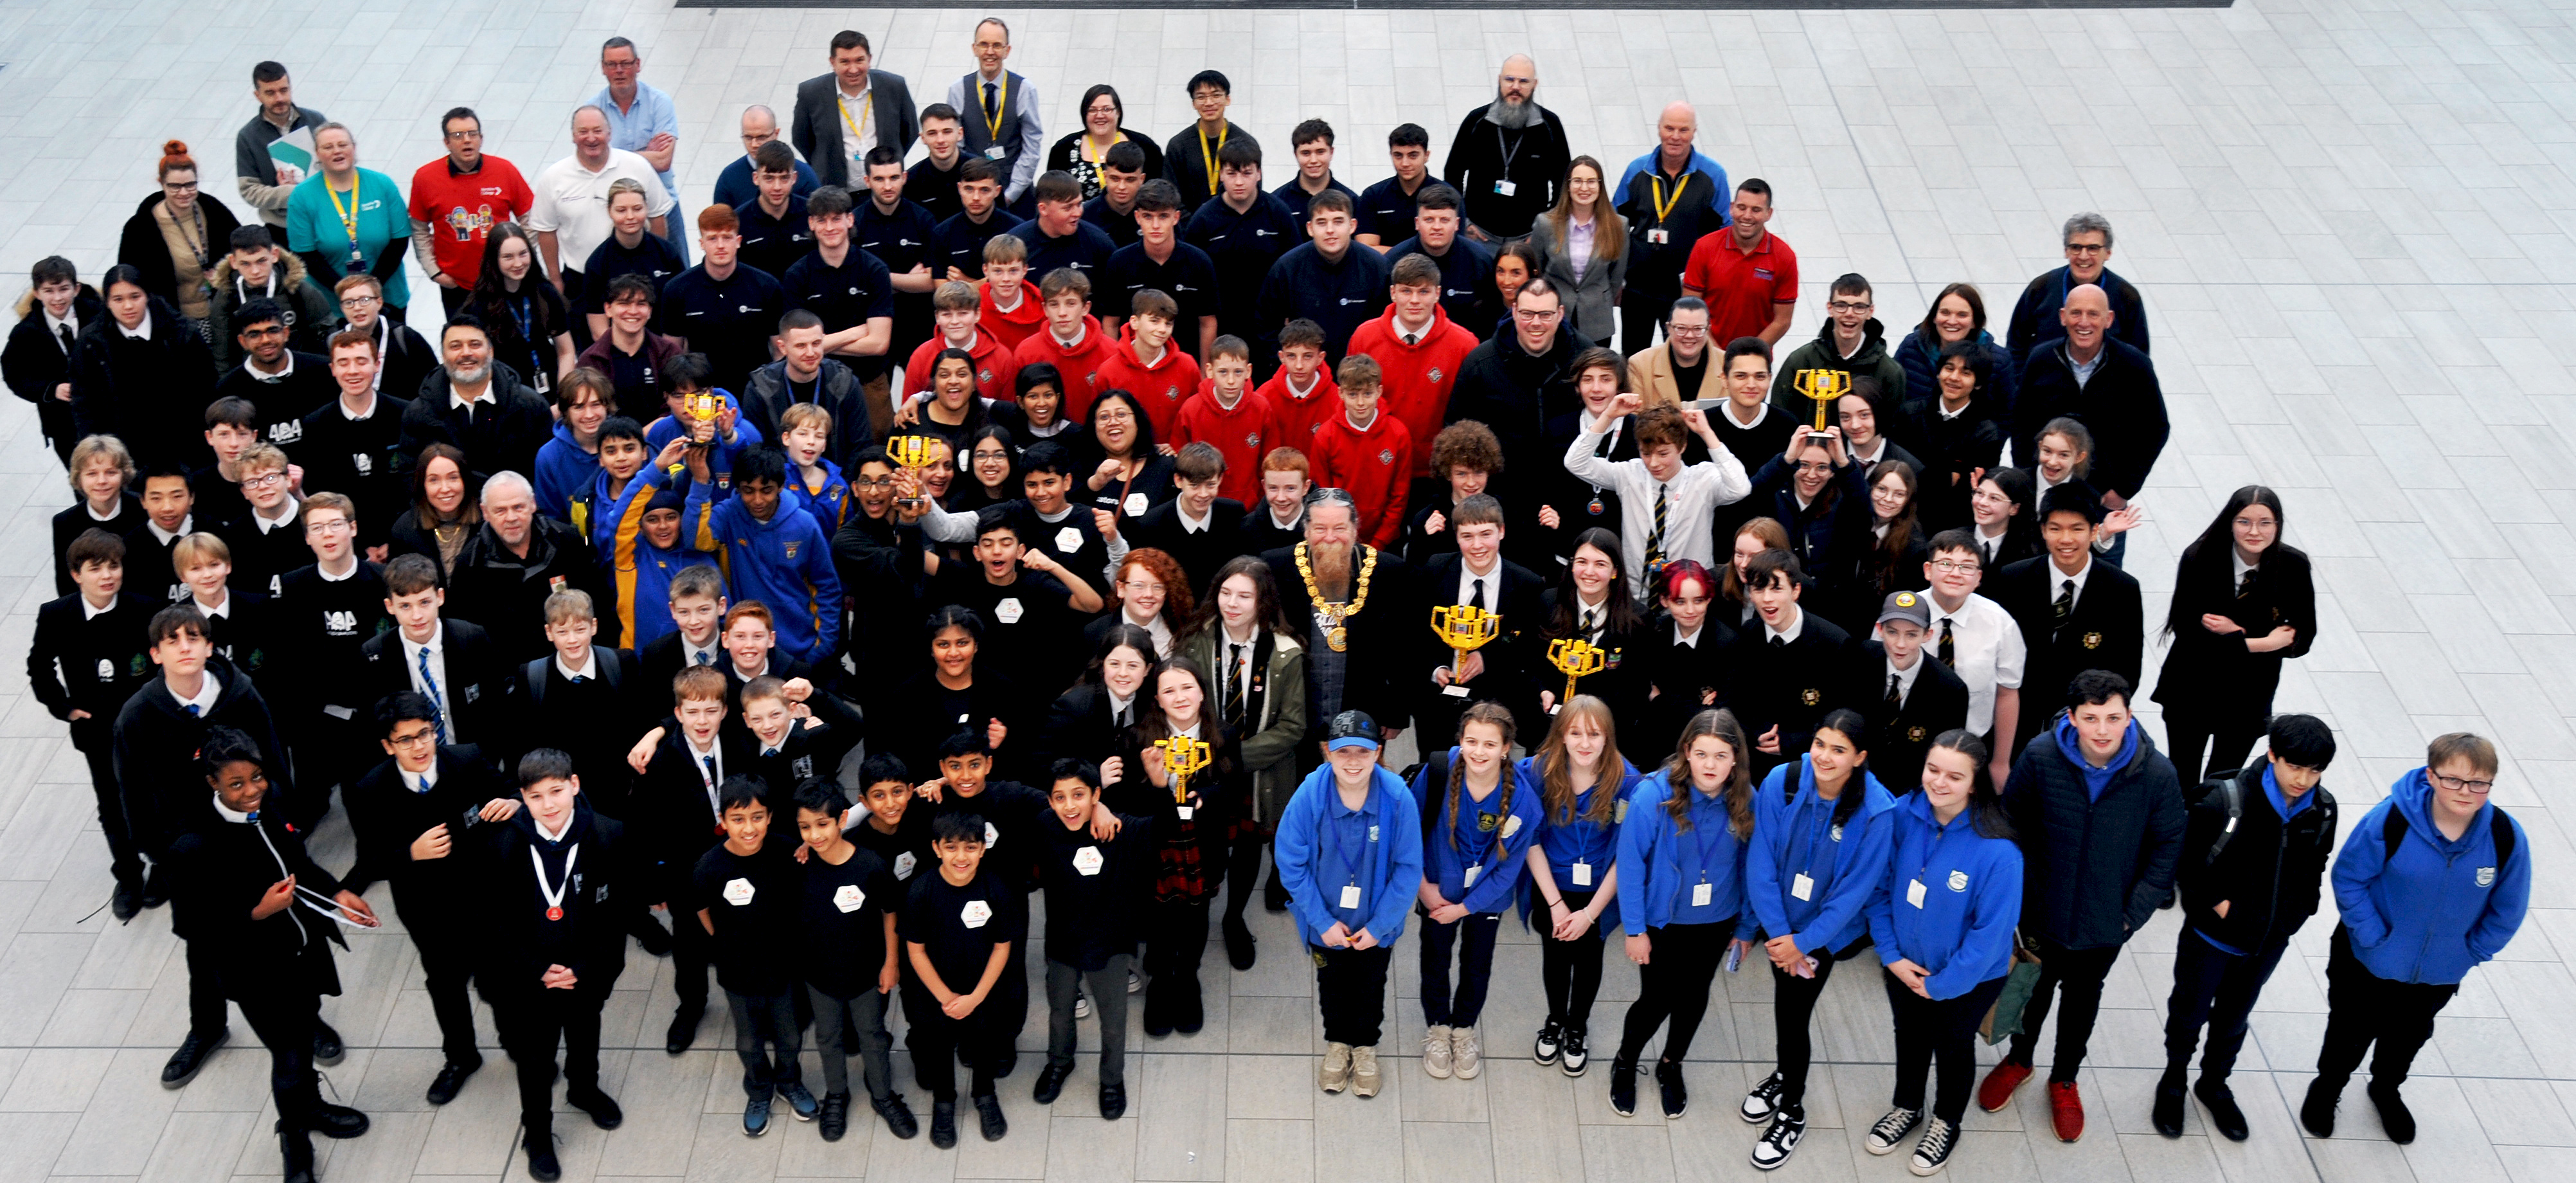 Ayrshire College hosts FIRST® LEGO® League Challenge regional tournament